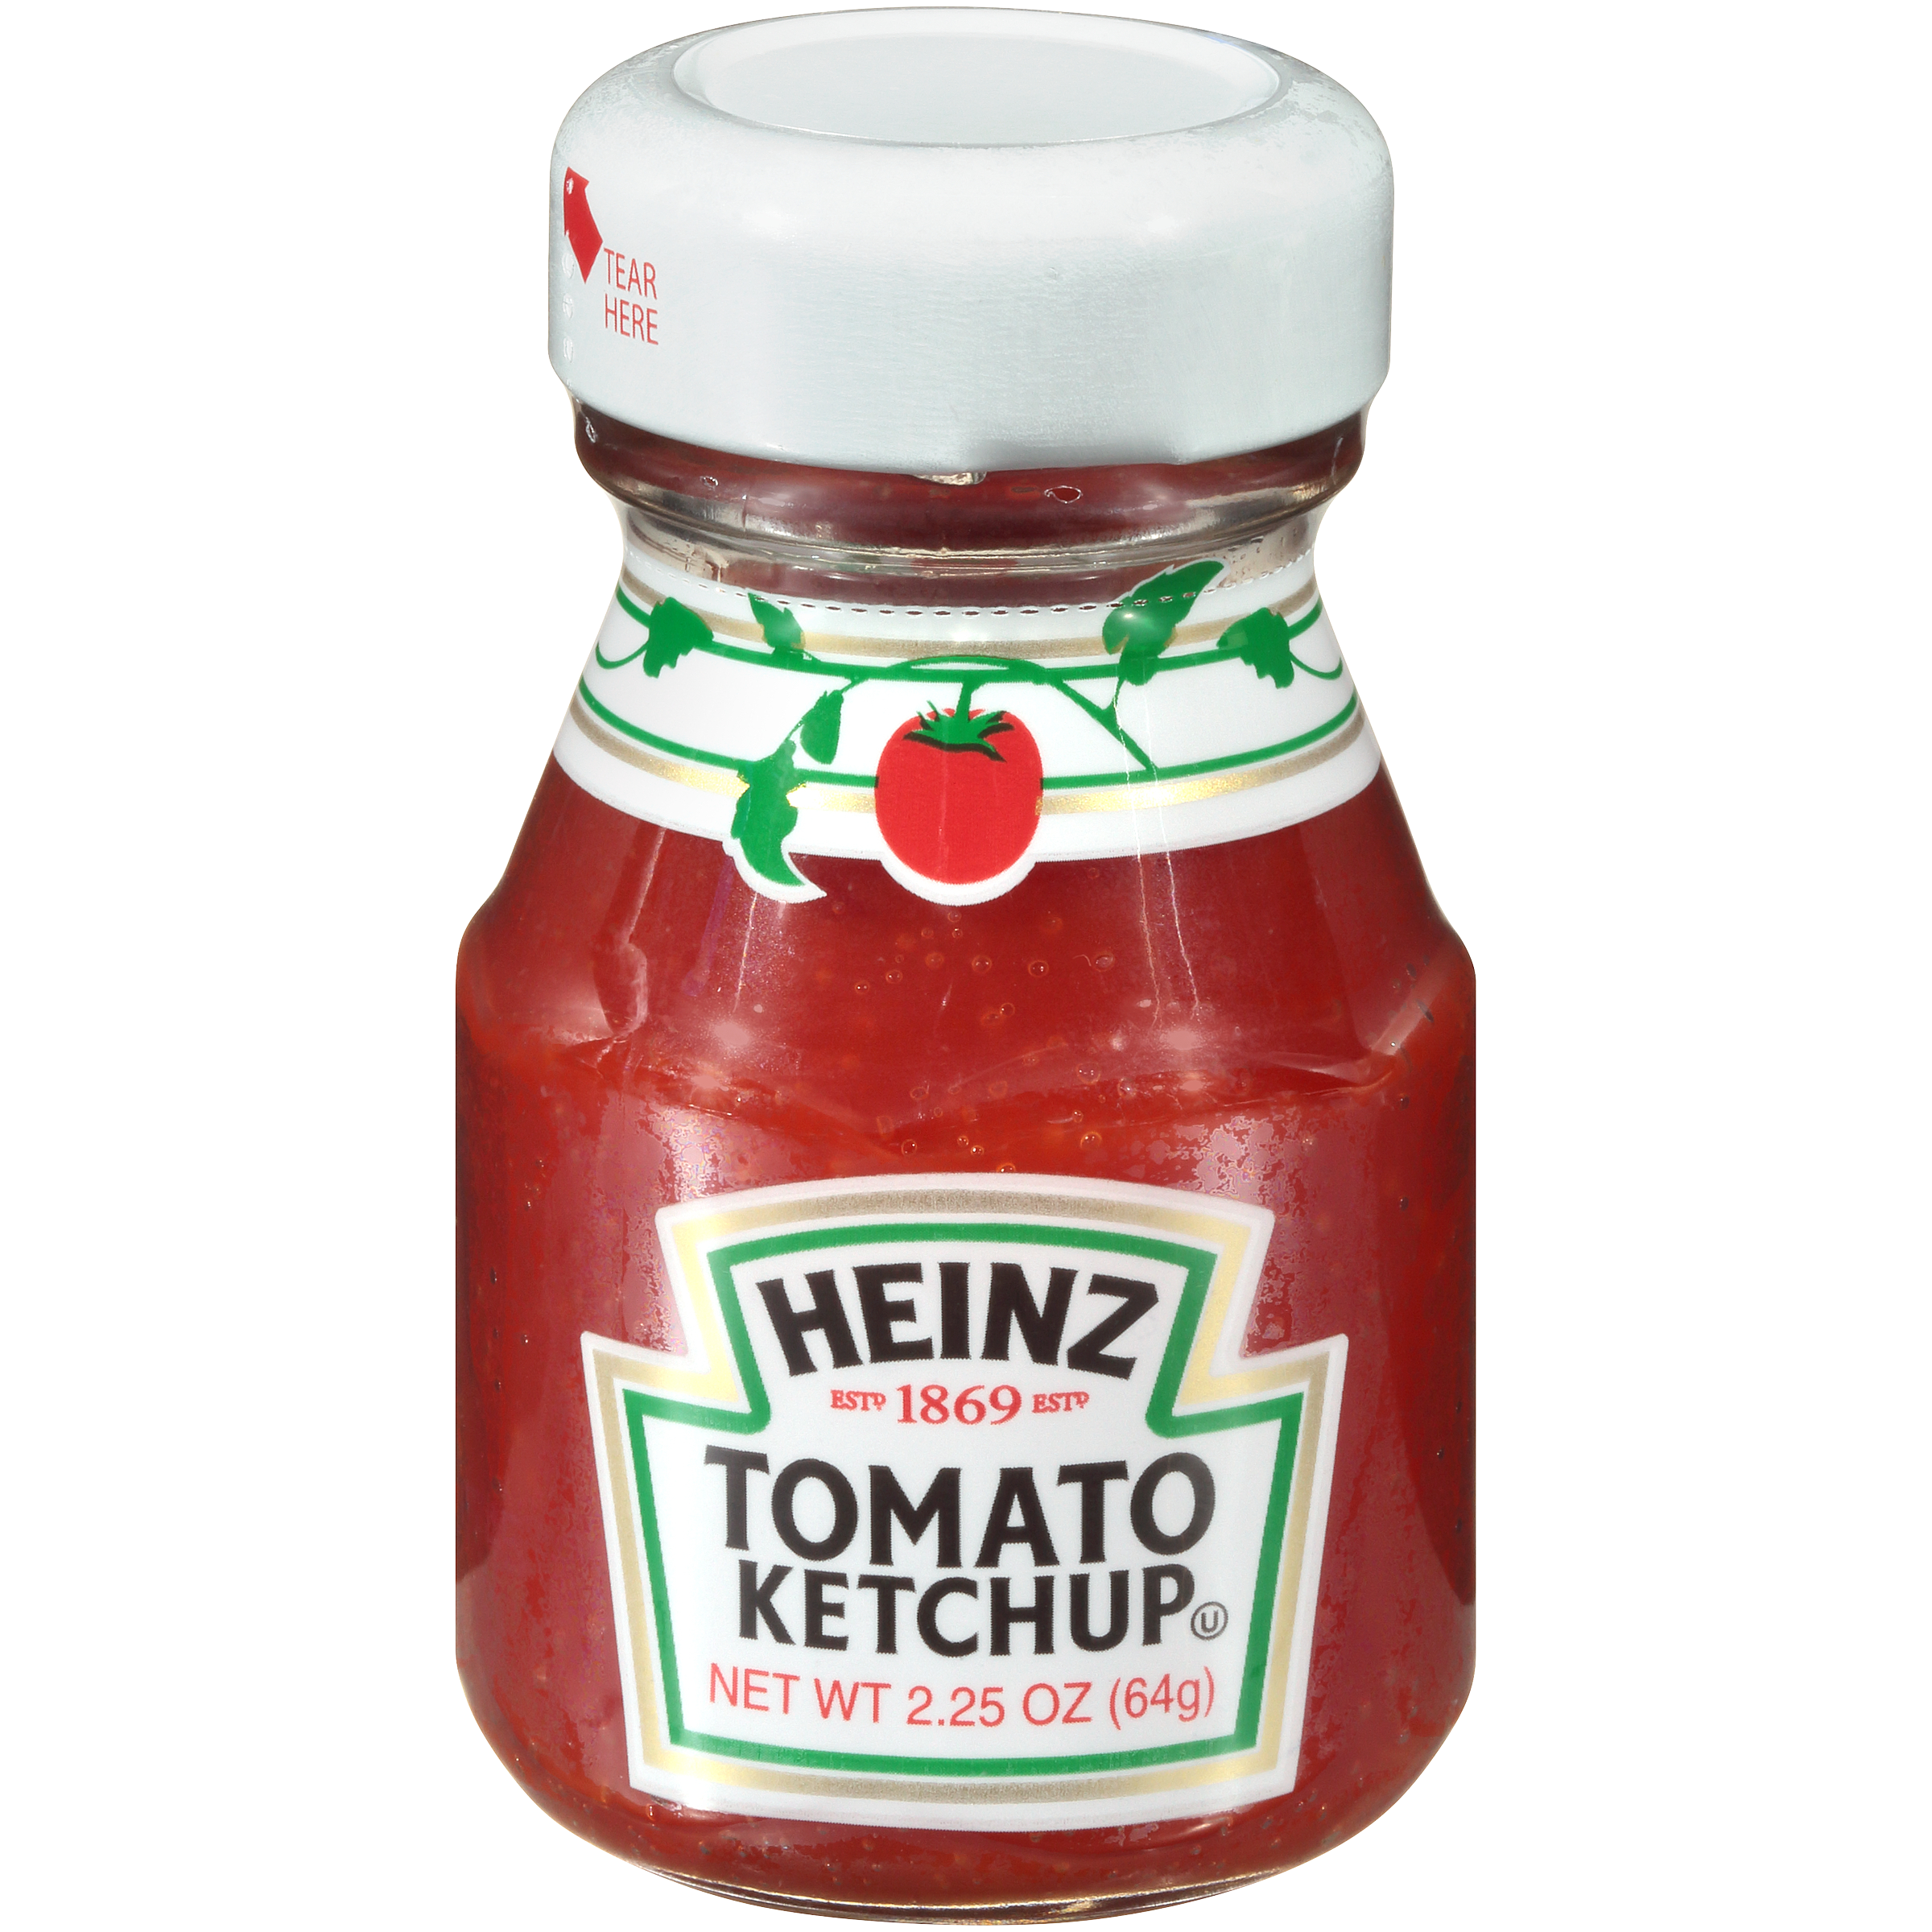 http://cdn.allotta.io/image/upload/v1693906230/dxp-images/afh/products/heinz-ketchup-single-serve-roomservice-jar-225-oz-container-pack-of-60-10013000514603-en-US.png